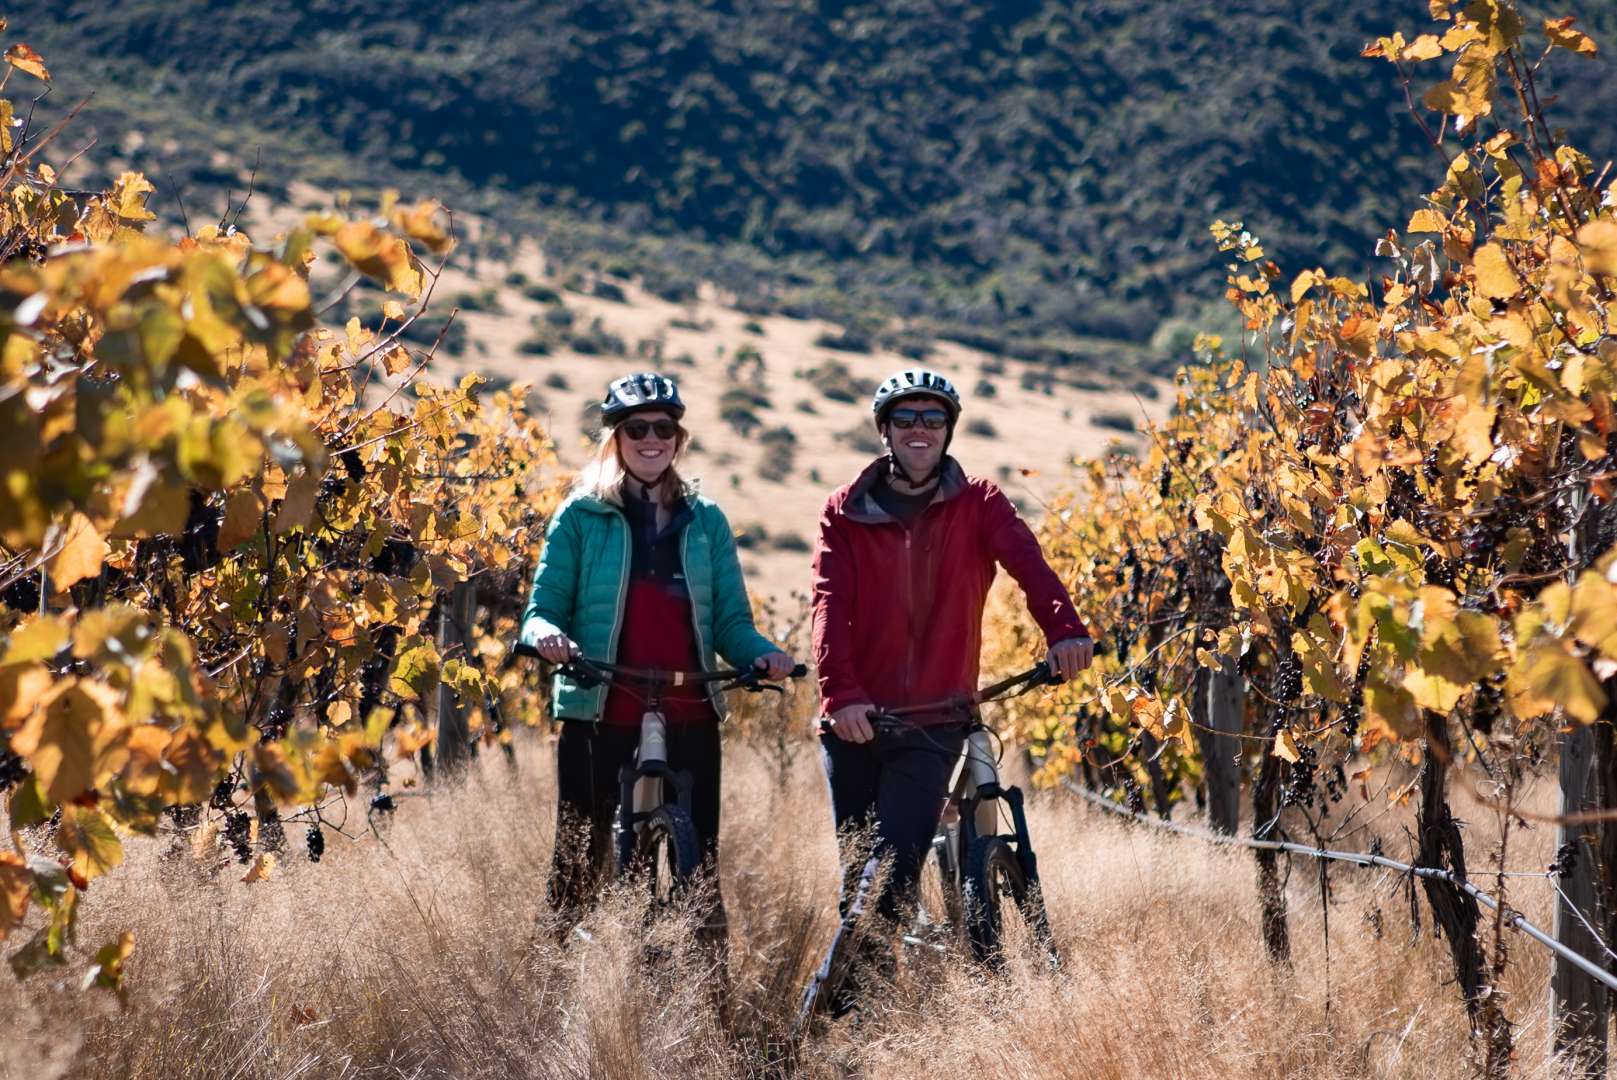 Queenstown bike tour, Visit as many as 8 wineries by bike